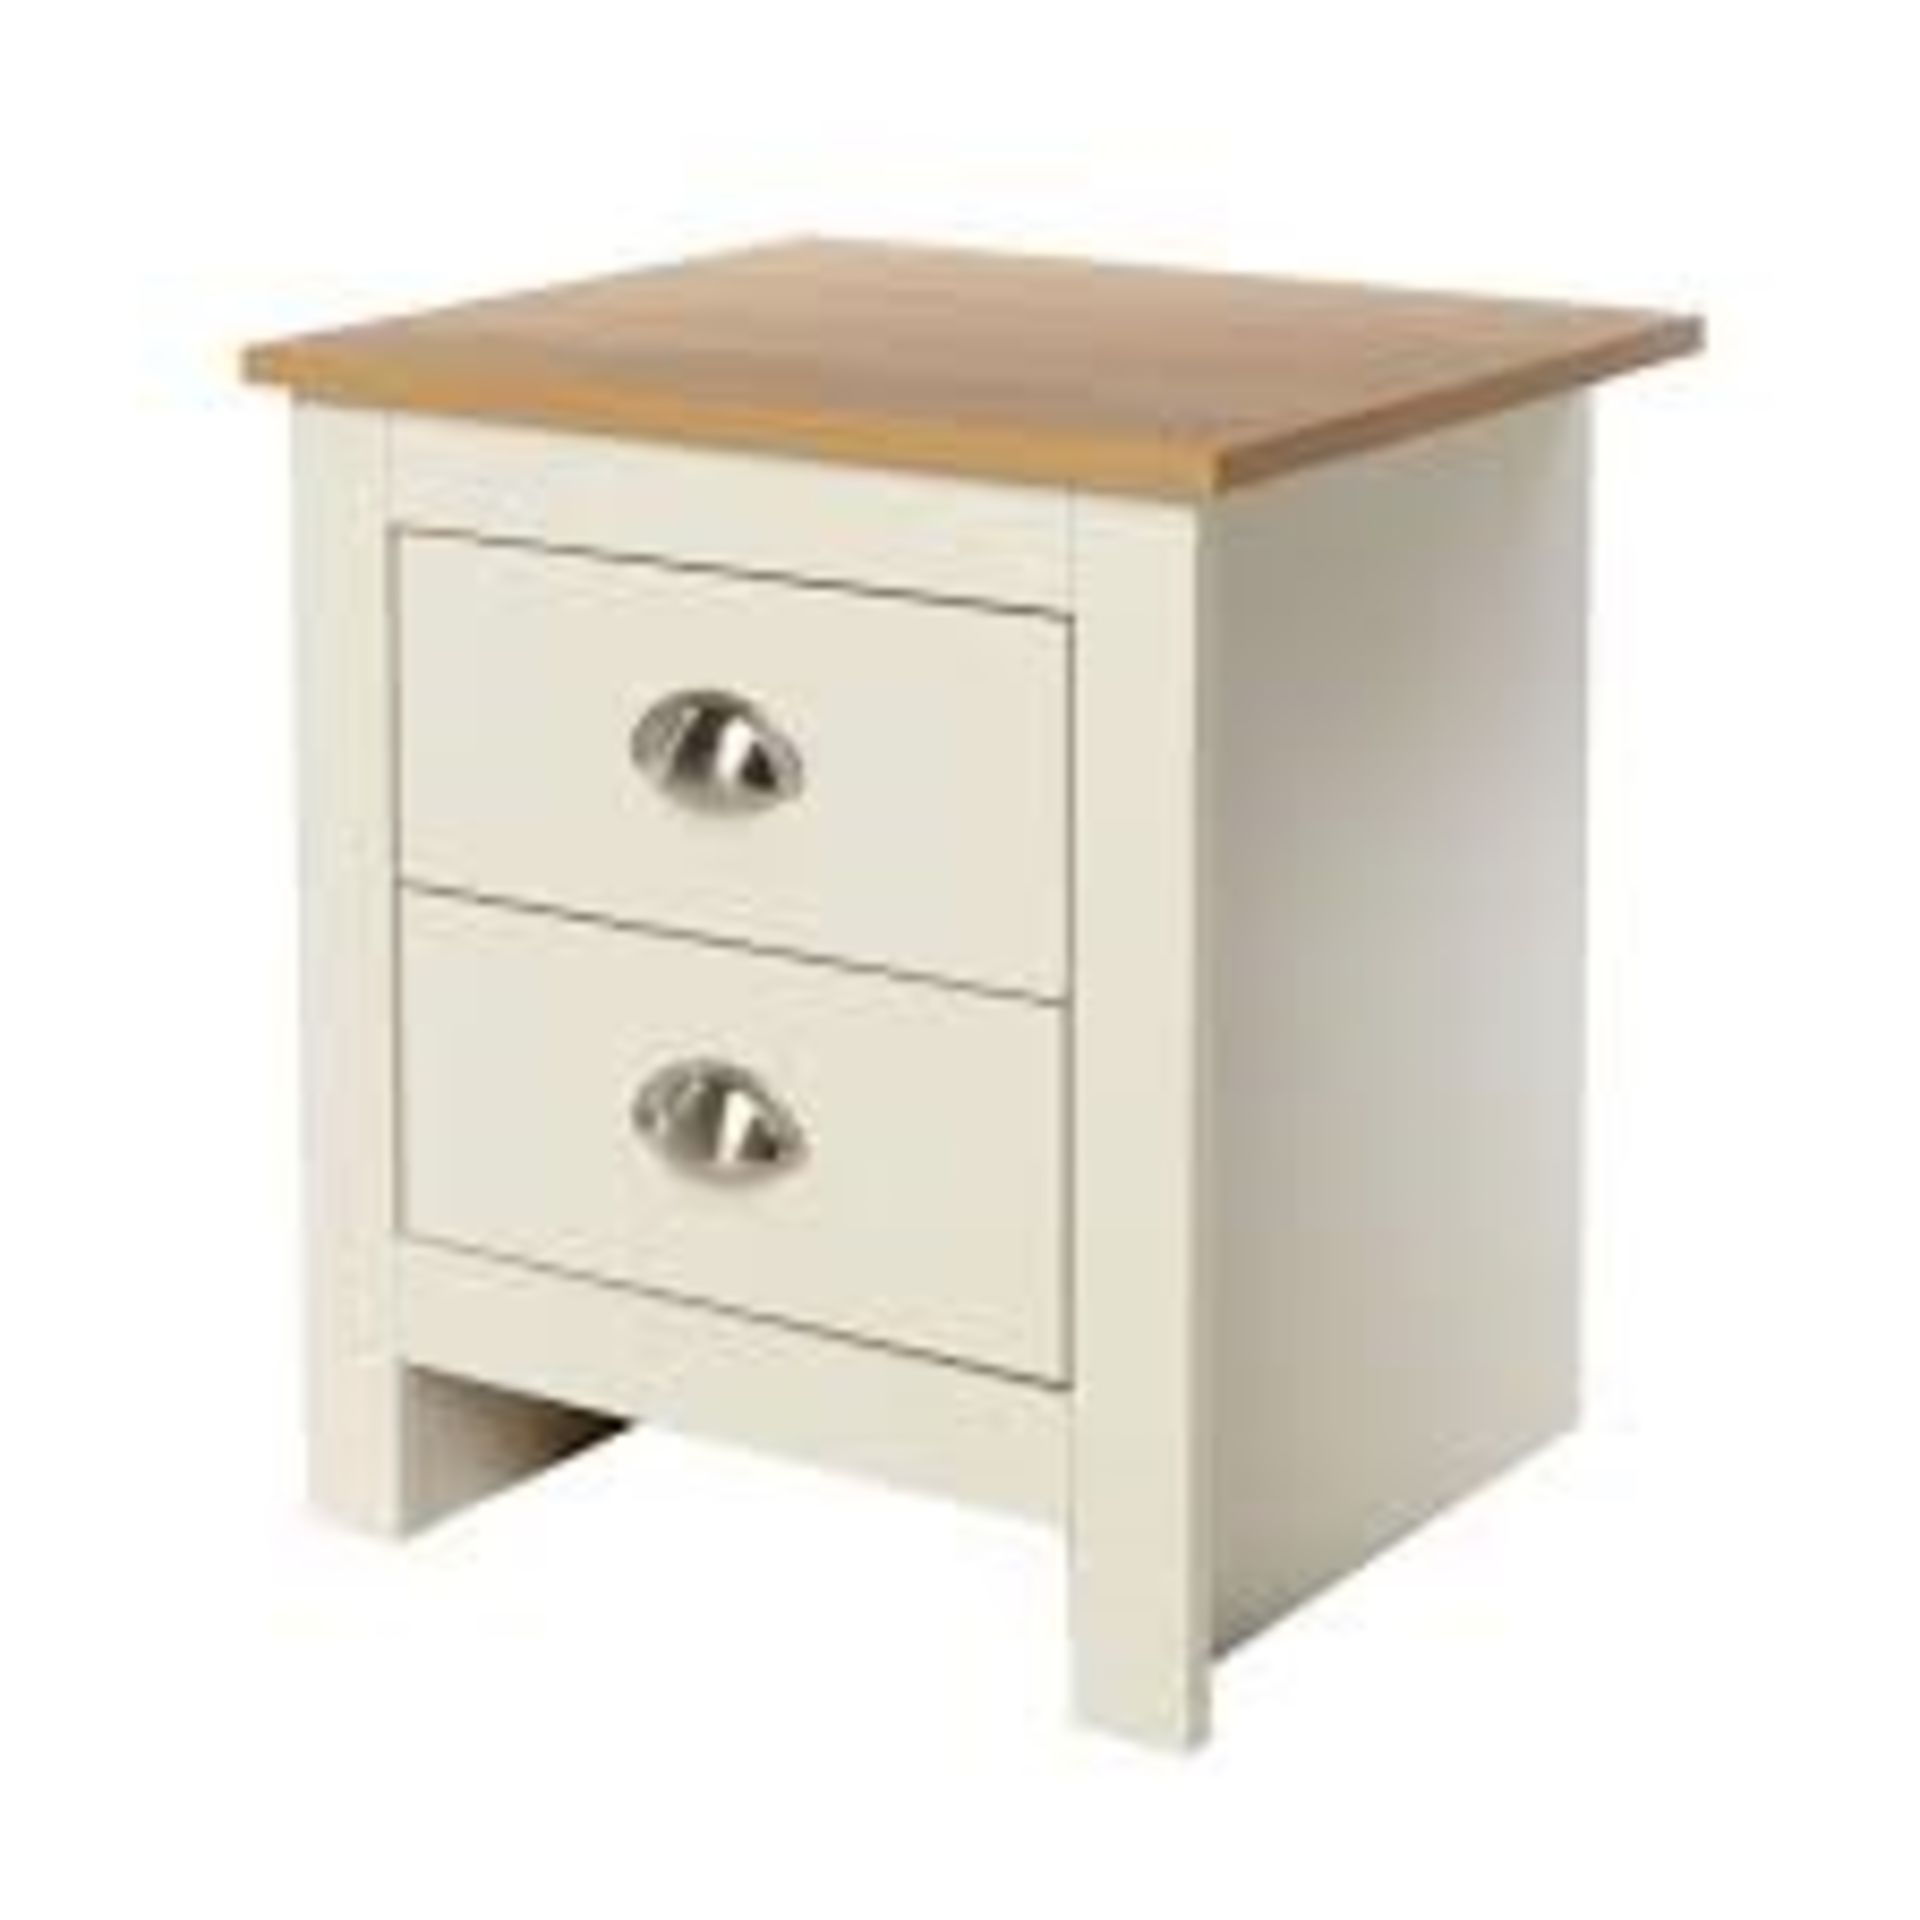 1 BOXED LANCASTER 2 DRAWER BEDSIDE TABLE IN GREY (PUBLIC VIEWING AVAILABLE)